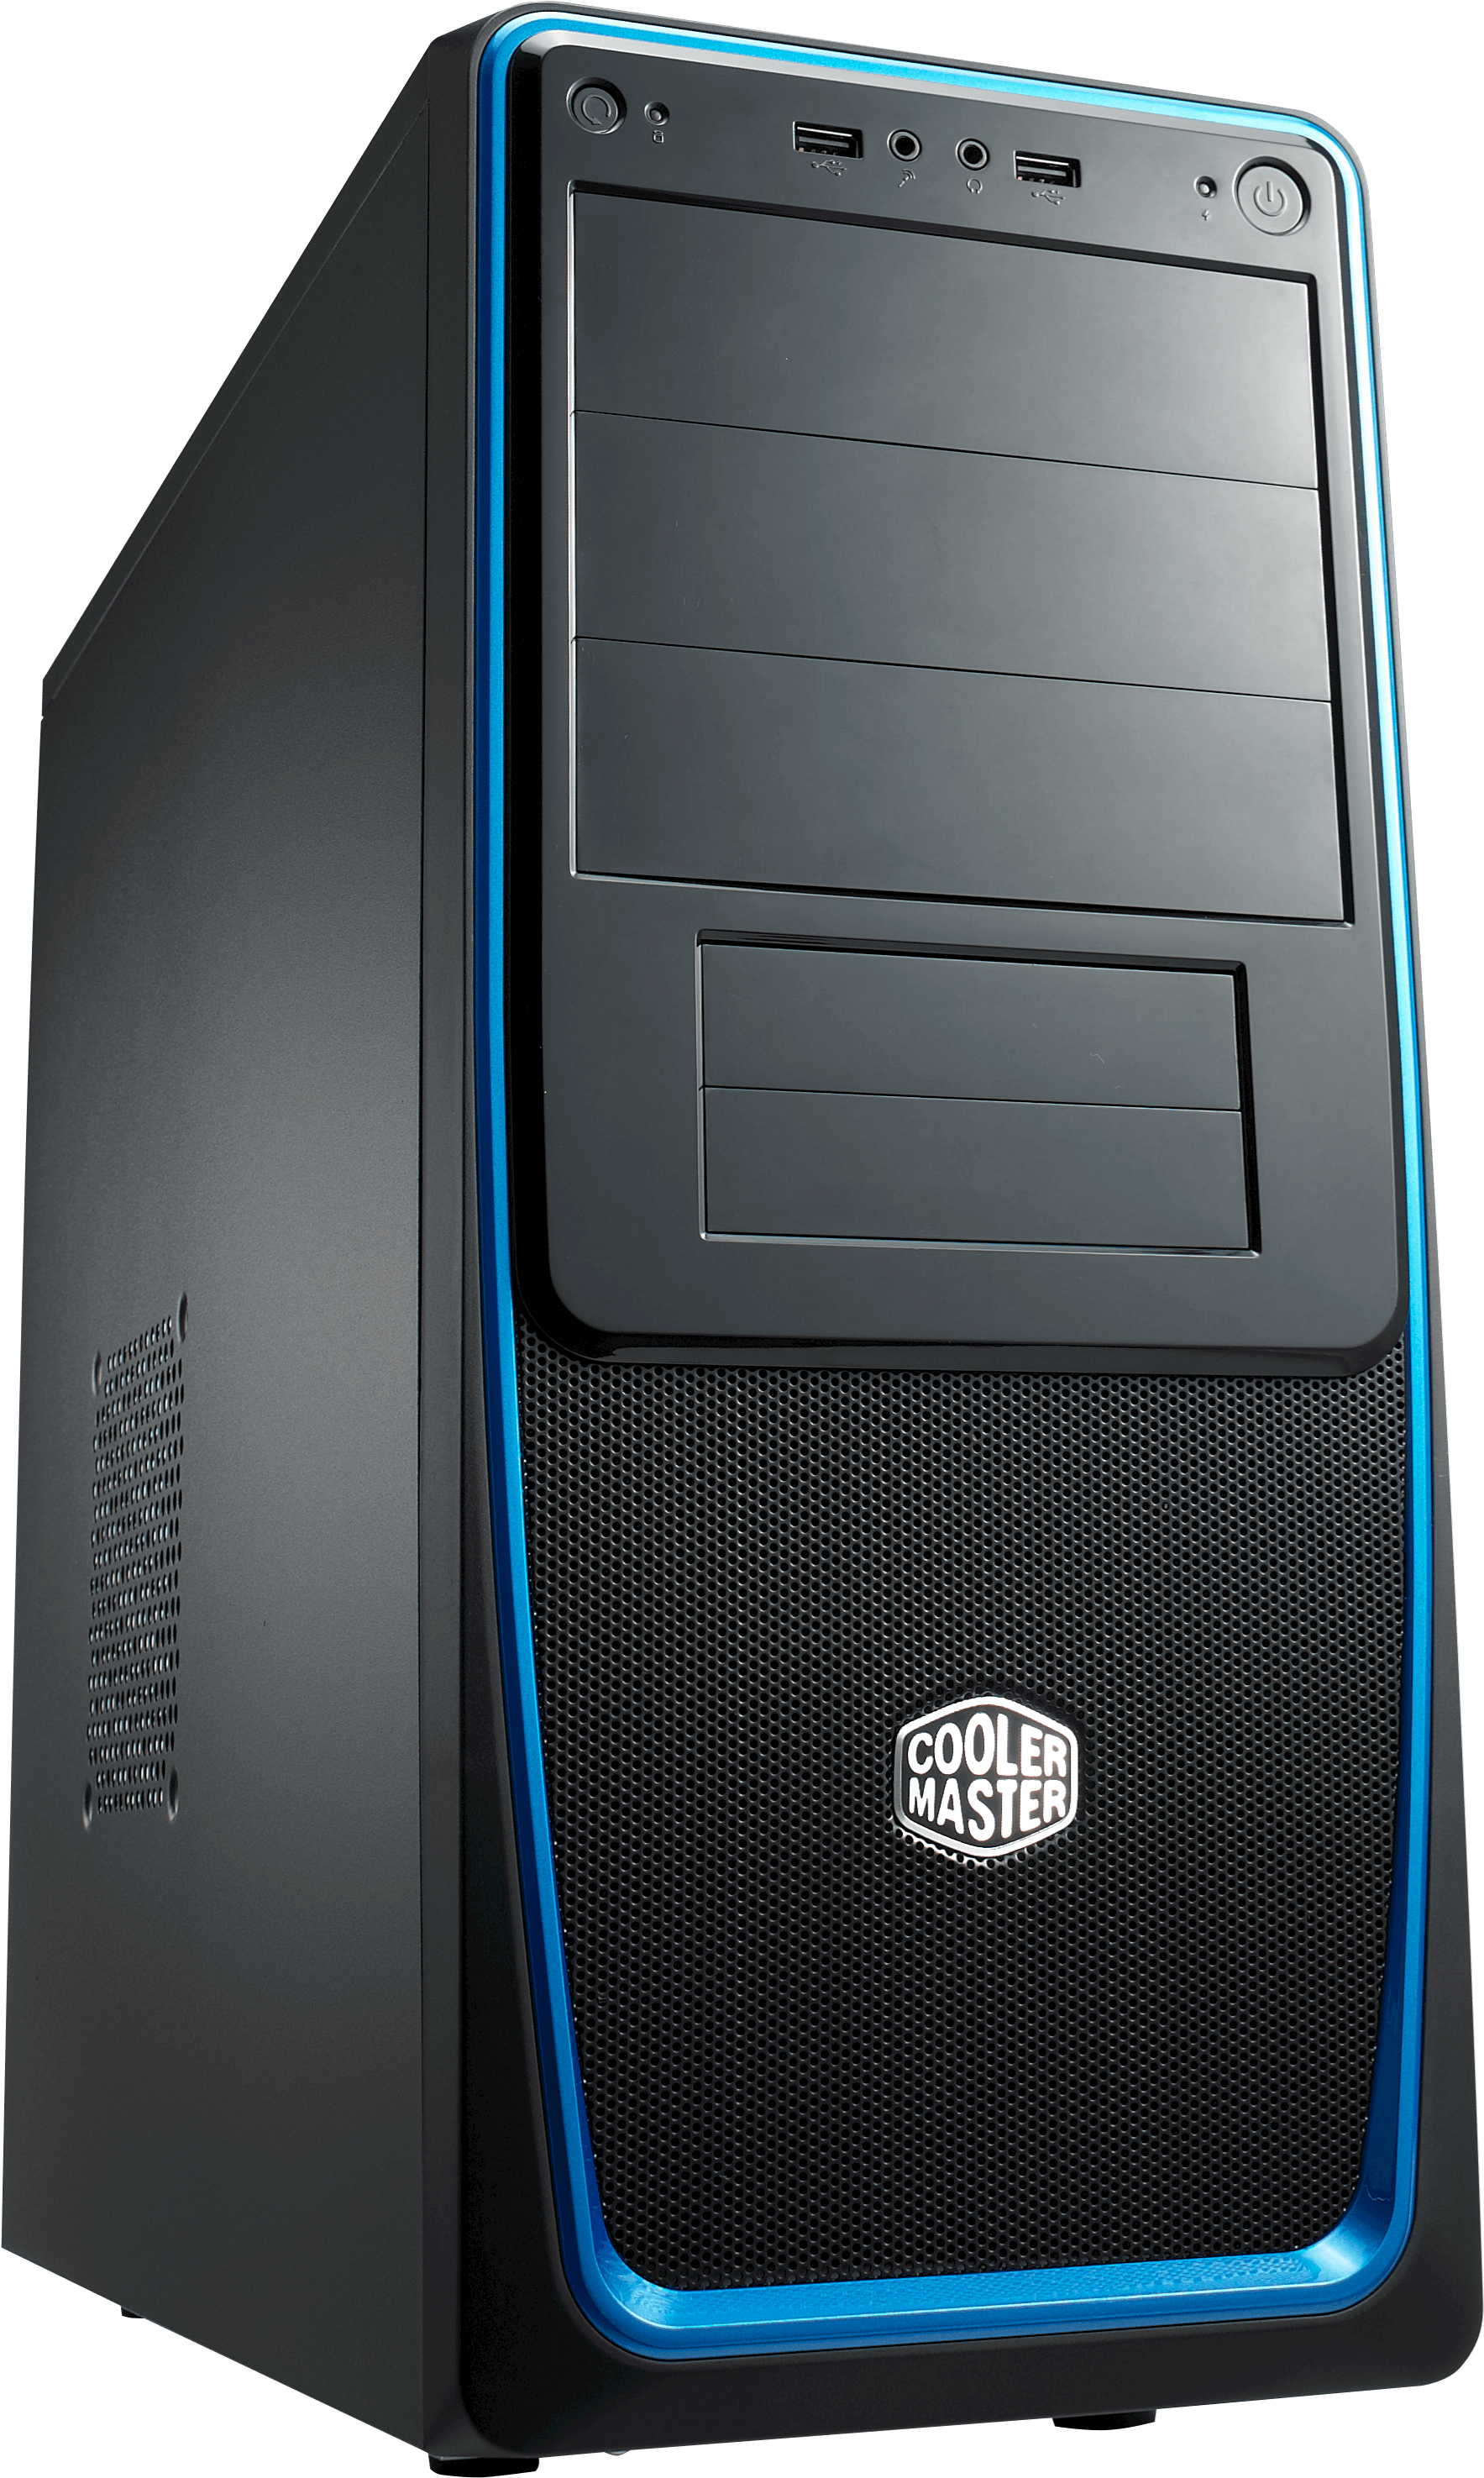 A Black And Blue Computer Tower